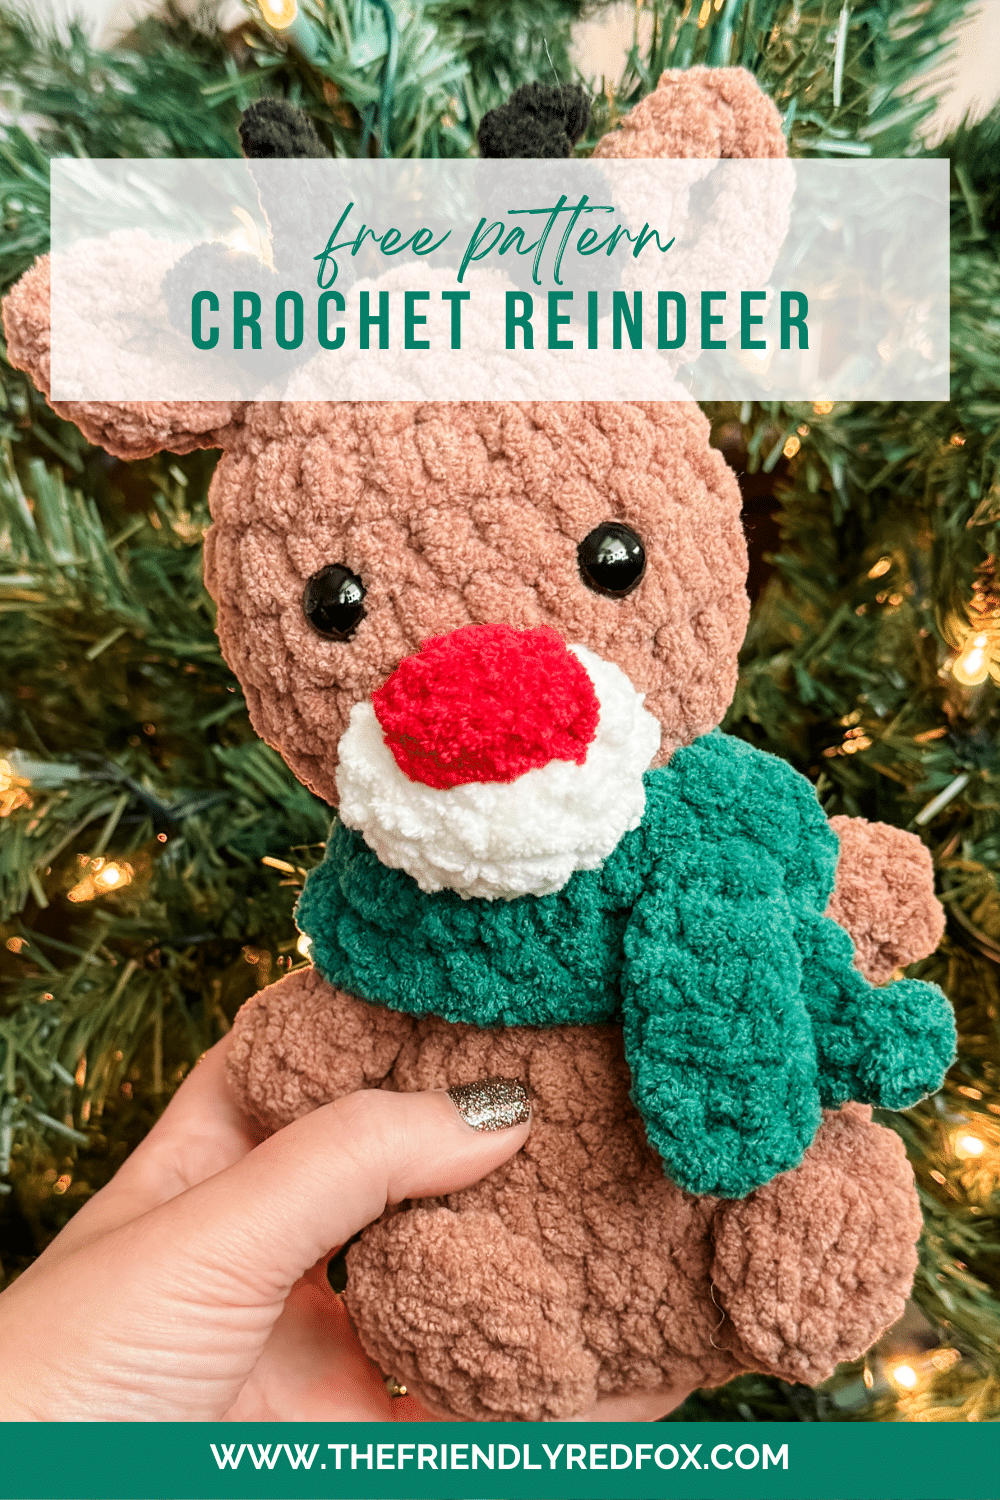 This free crochet reindeer pattern makes a squishy plush pal! This works up quickly with blanket yarn, perfect for gifts and markets.